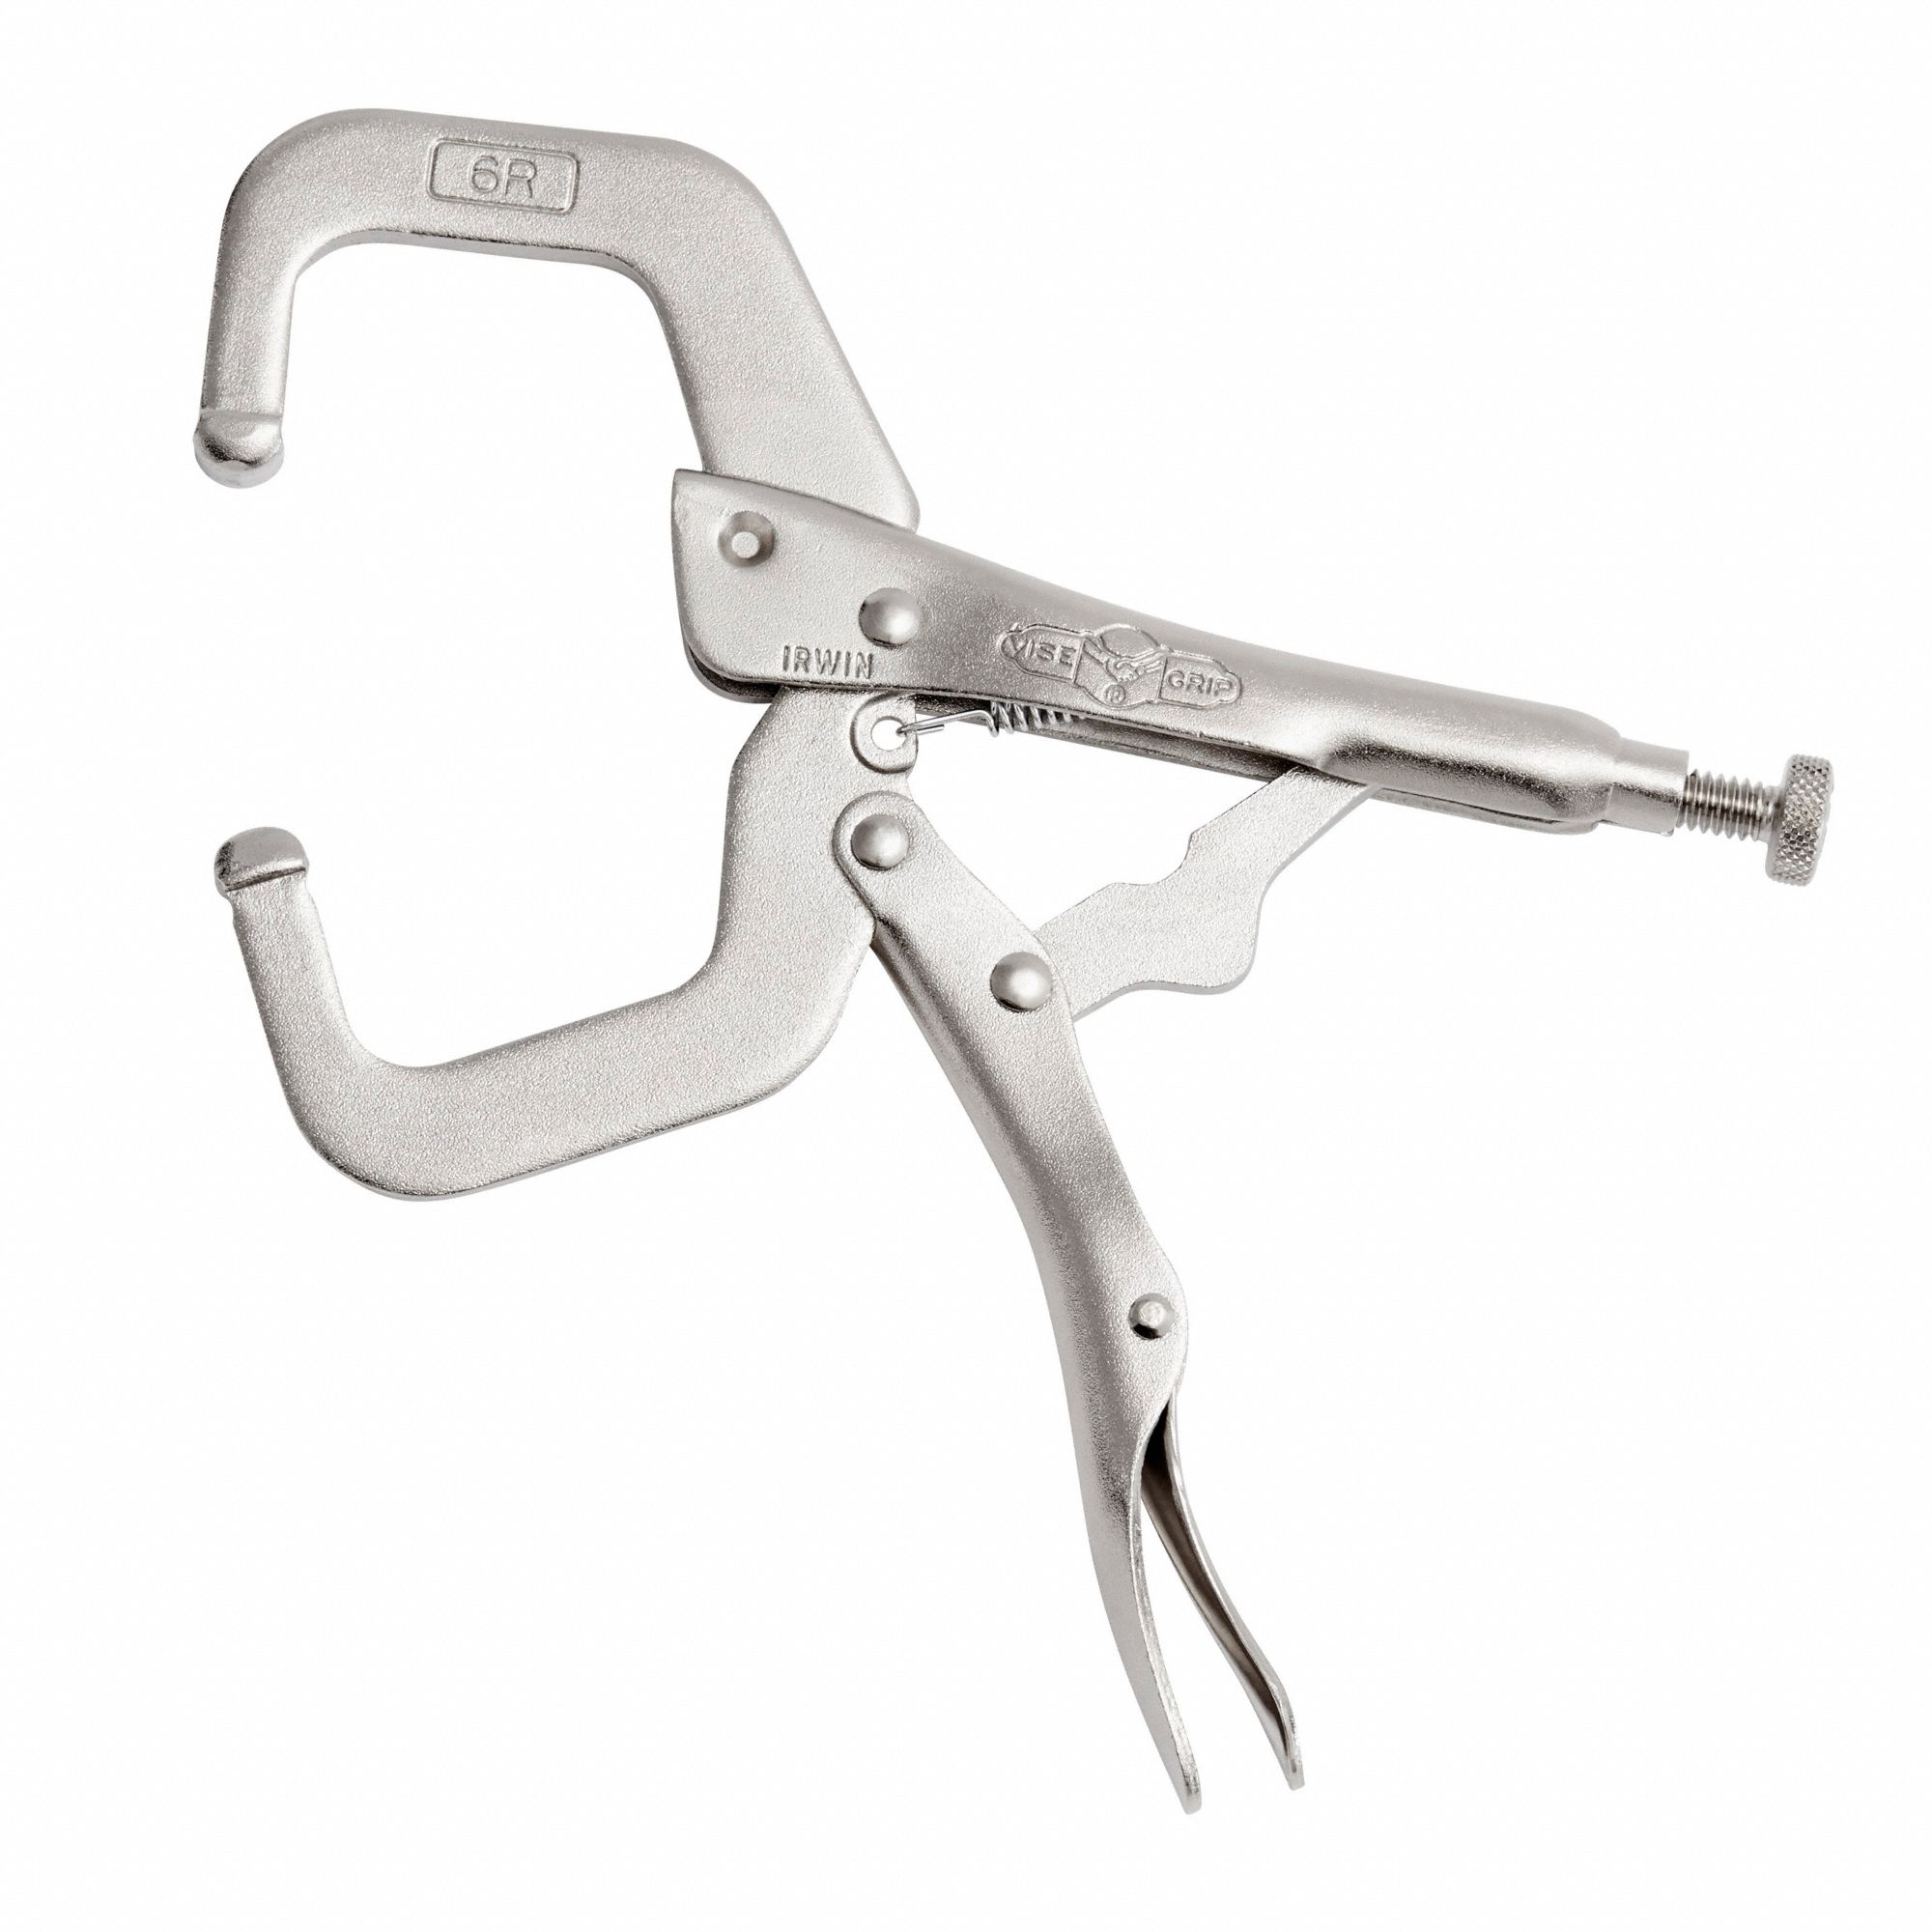 IRWIN Vise-Grip Extended-Throat C-Clamp with Regular Tips 7 1/2in Model# 211 Jaw Opening